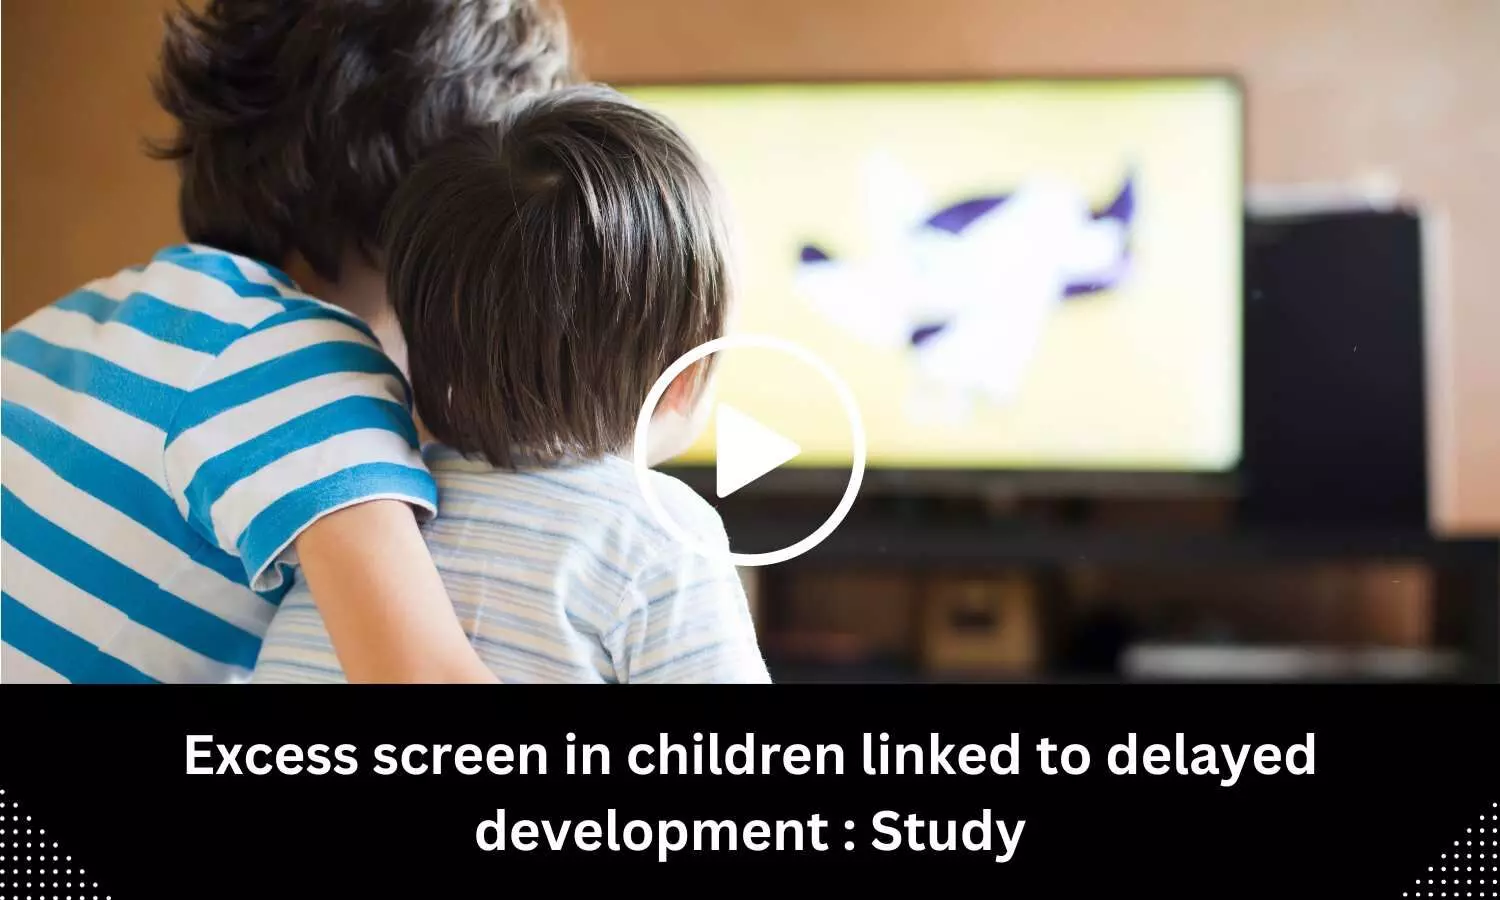 Excess screen time in children linked to delayed development : Study